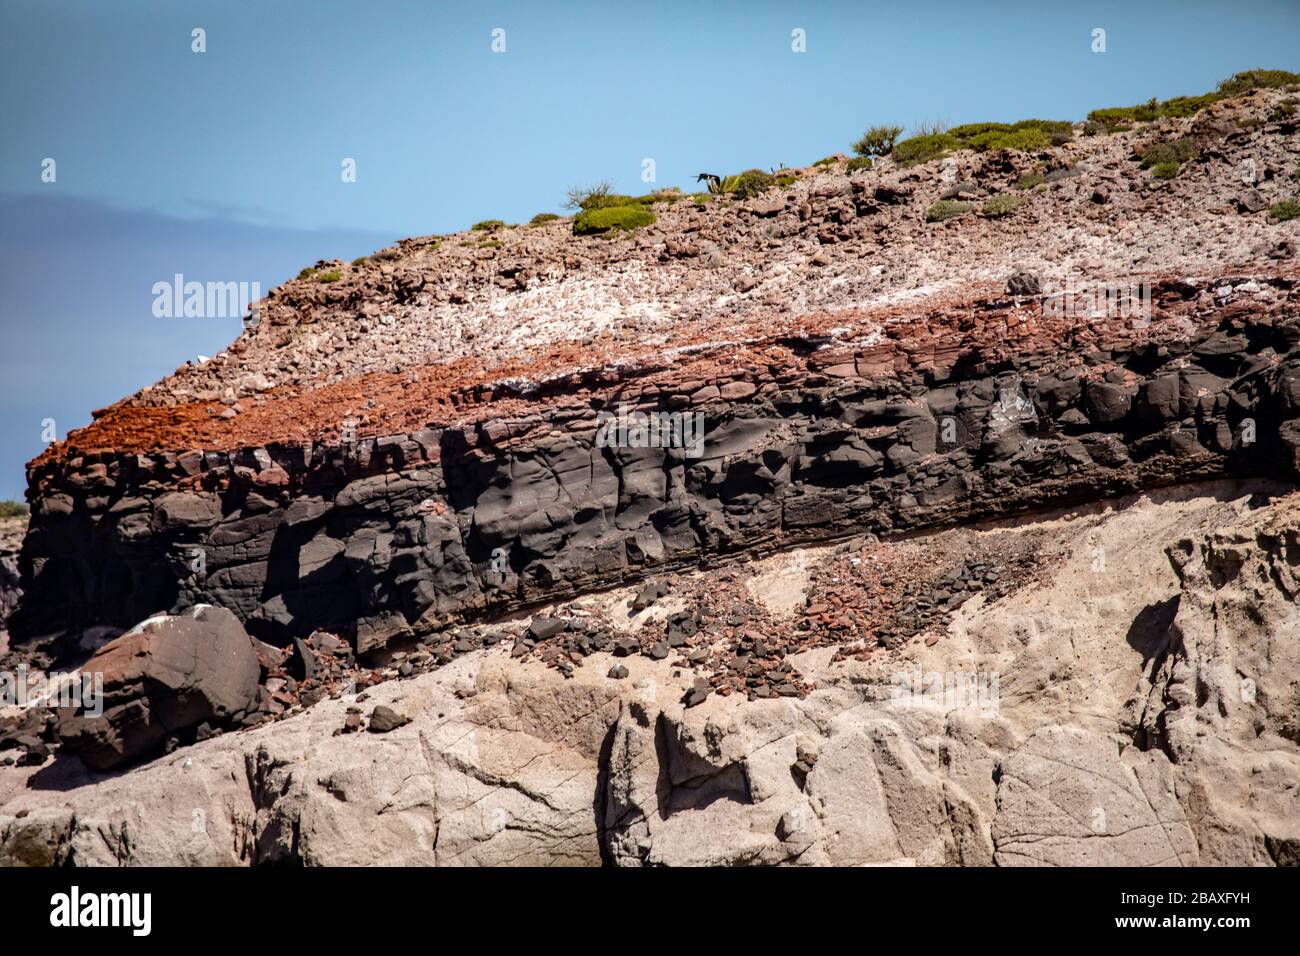 The rocks forming a small mountain with different layers of sediments formed different colors with the blue Cortez sea on the bottom Stock Photo